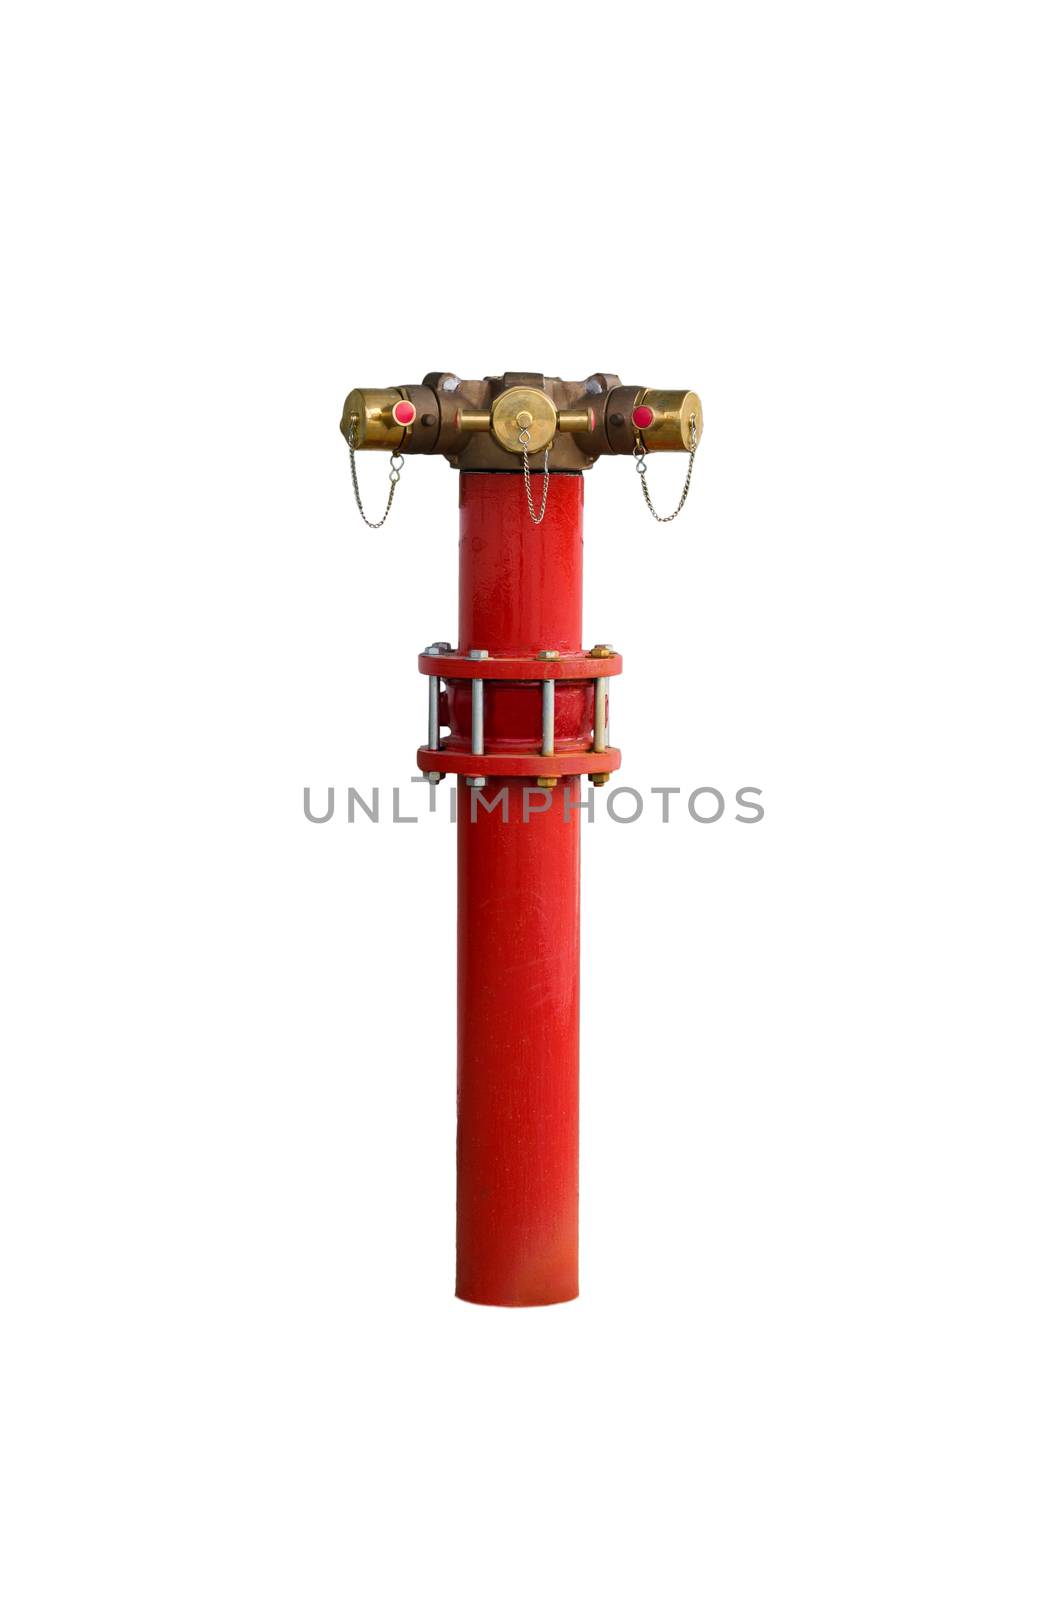 Red metallic fire hydrant or Fire Department Connection isolated on white background